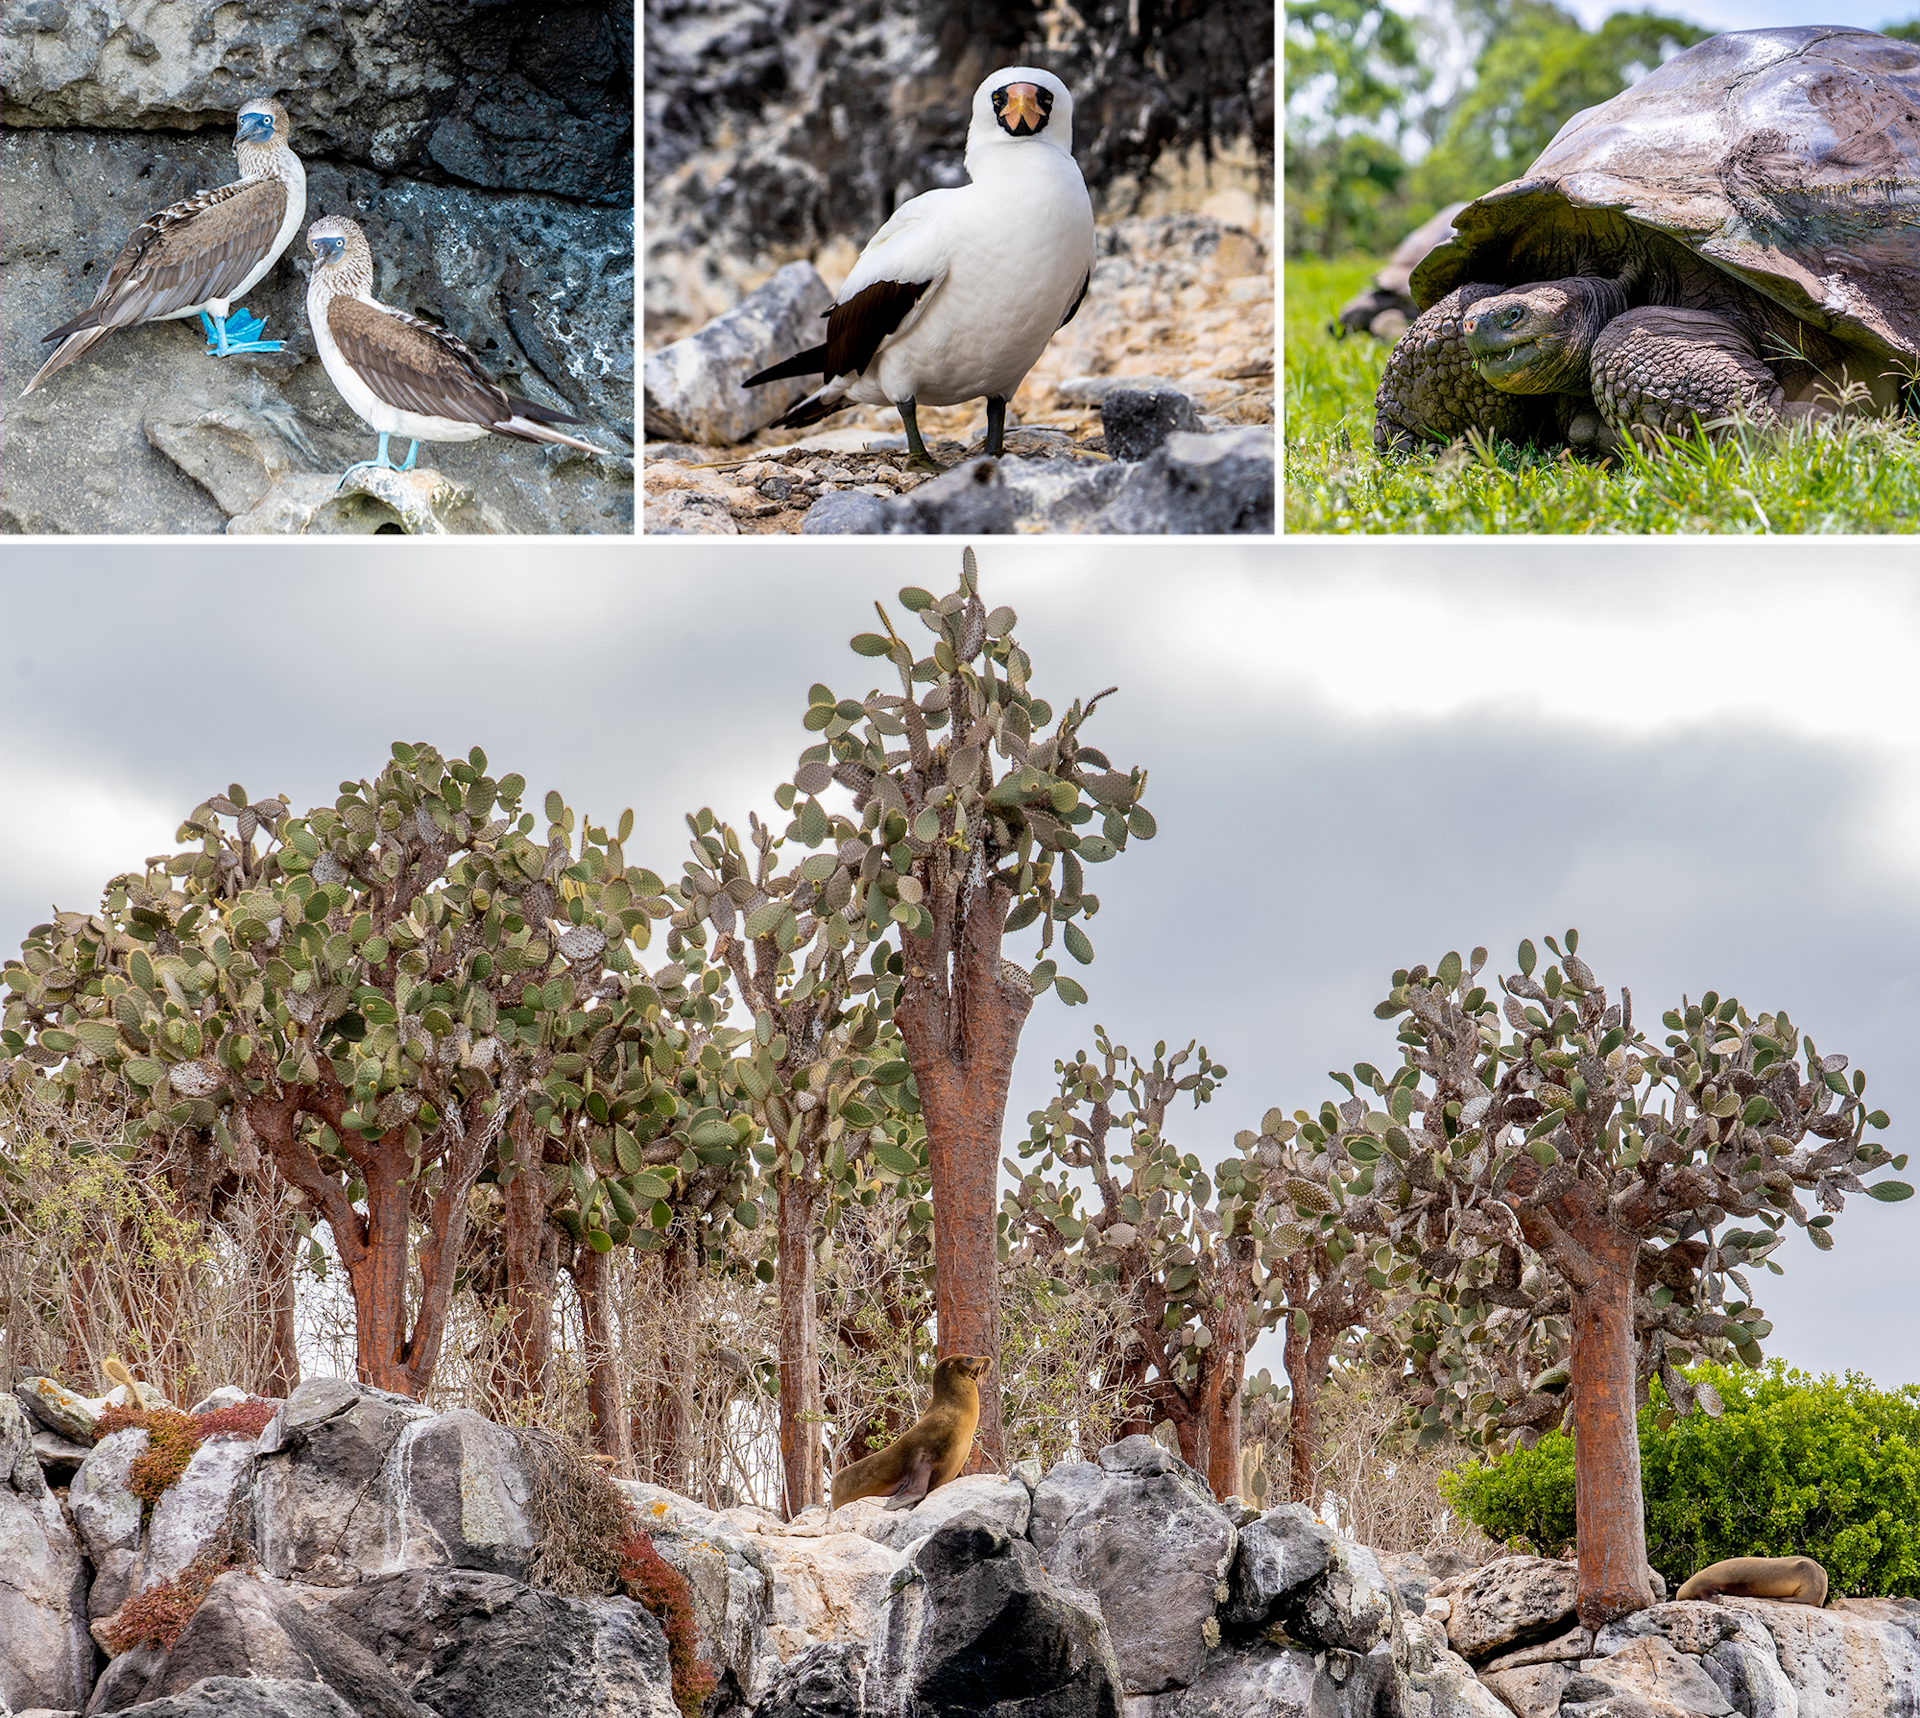 Various birds, a seal and a tortoise in their natural habitats